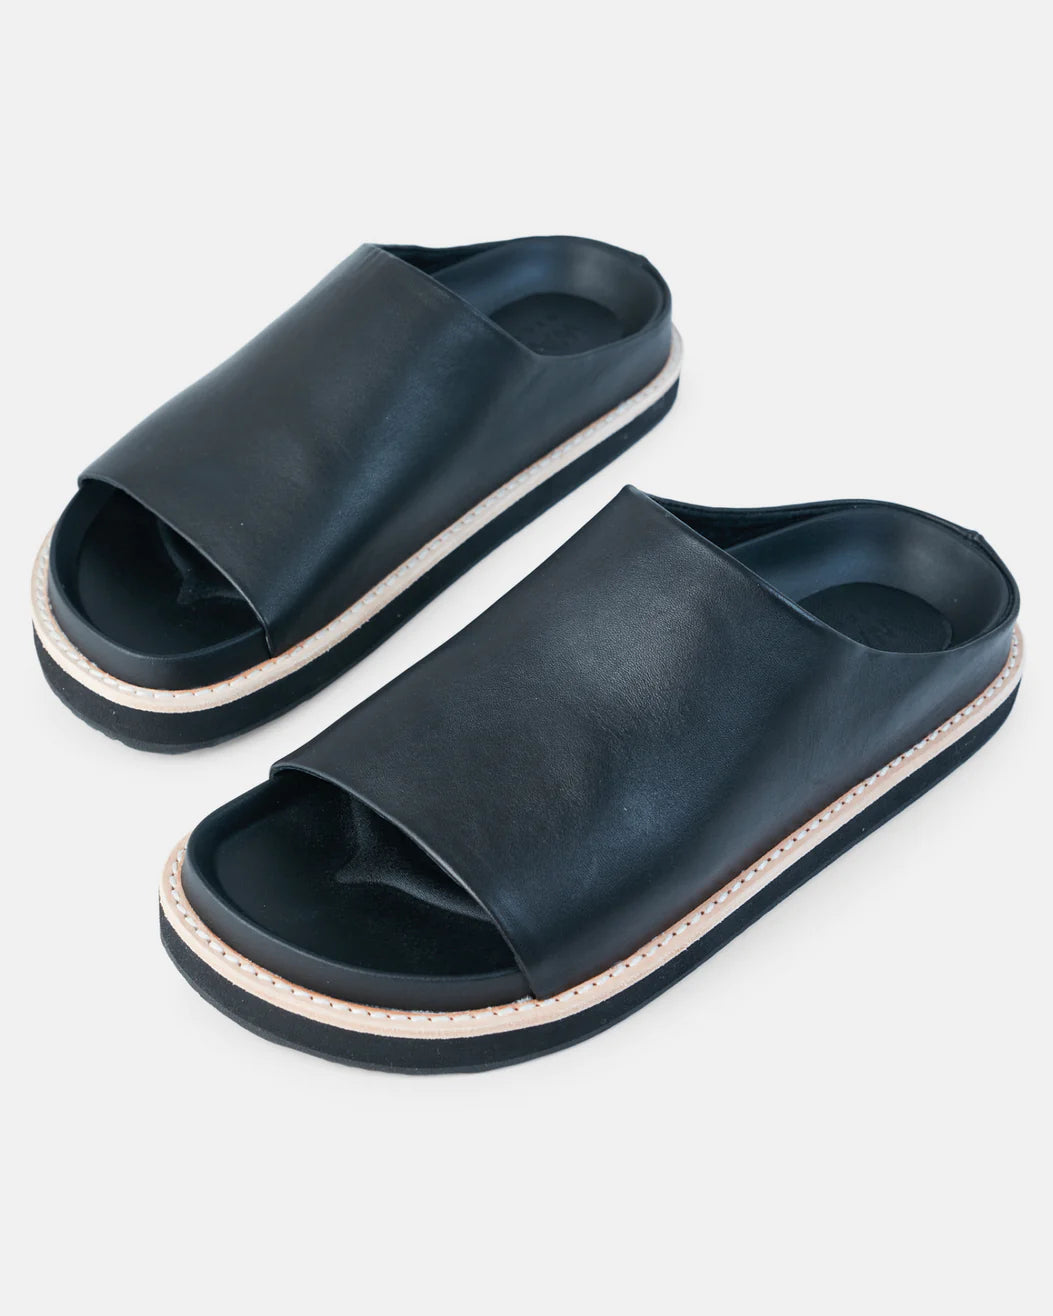 Palm Leather Slide WAS $150